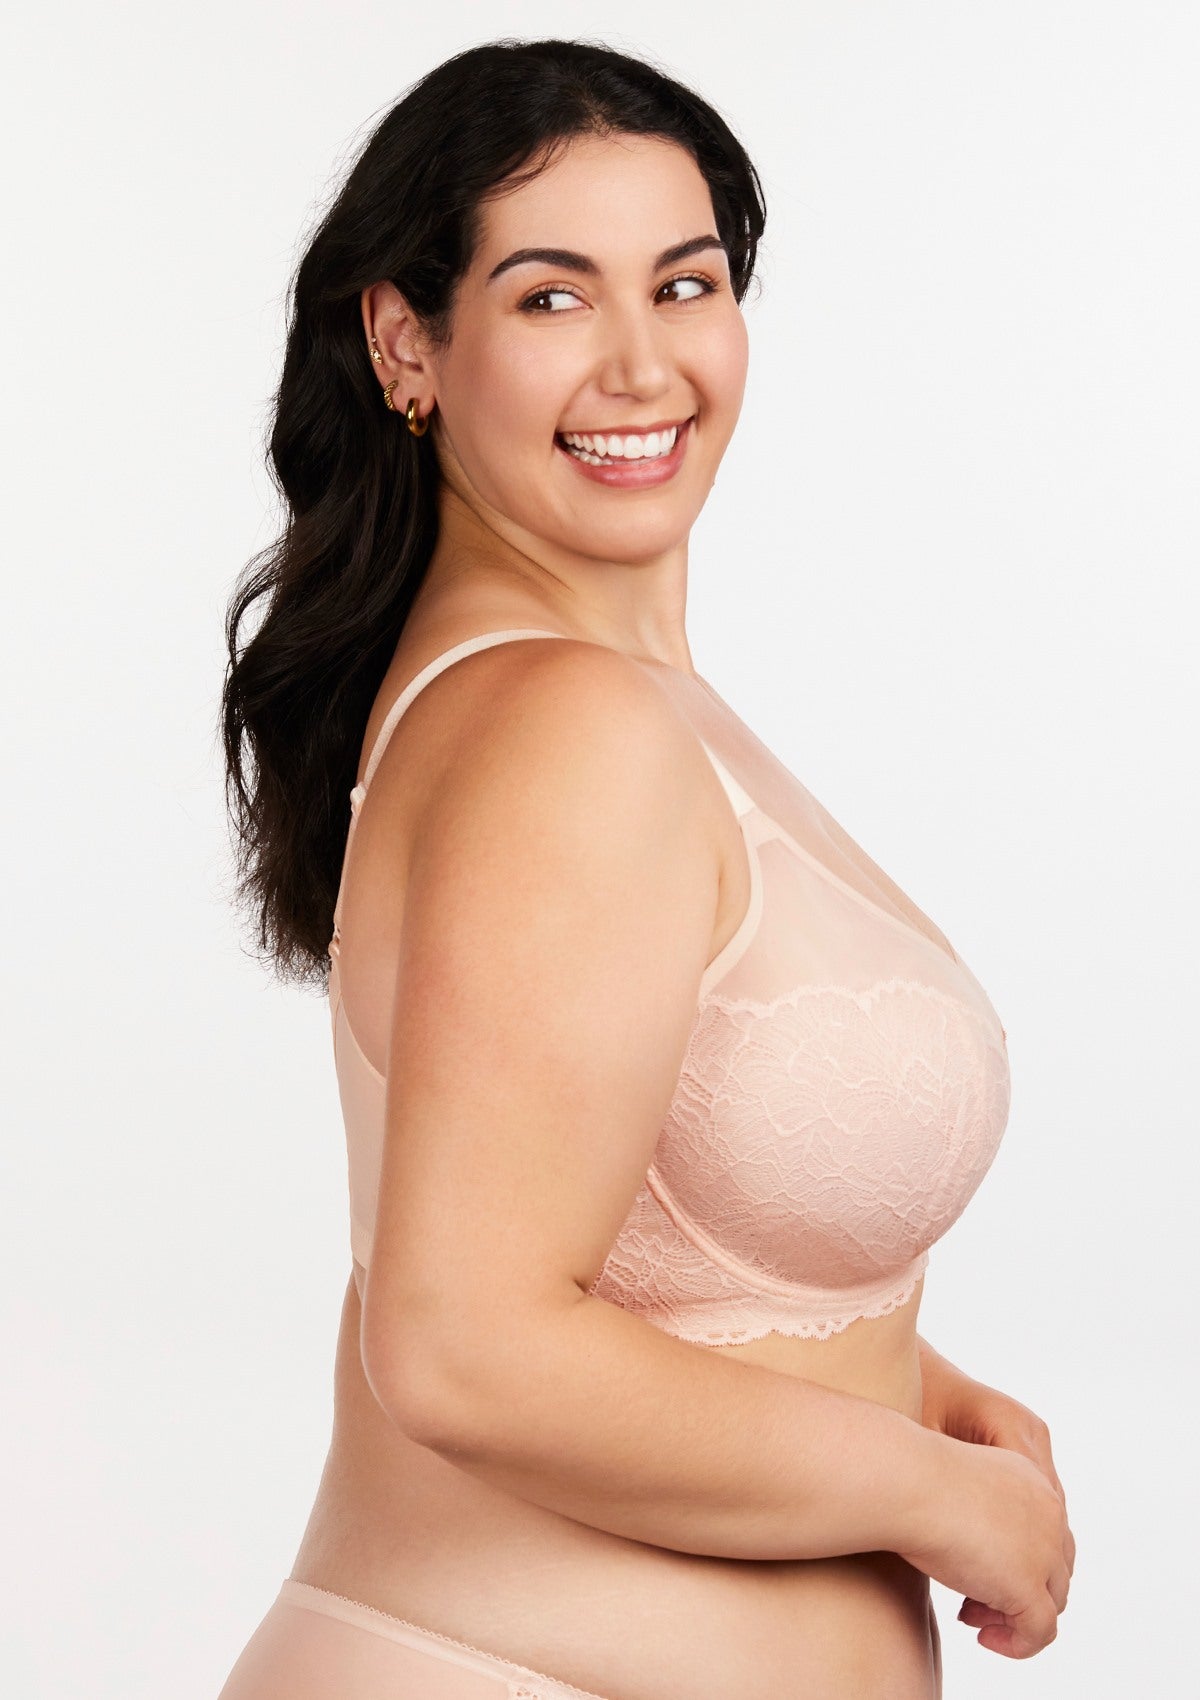 HSIA Blossom Sheer Lace Bra: Comfortable Underwire Bra For Big Busts - Dusty Peach / 44 / H